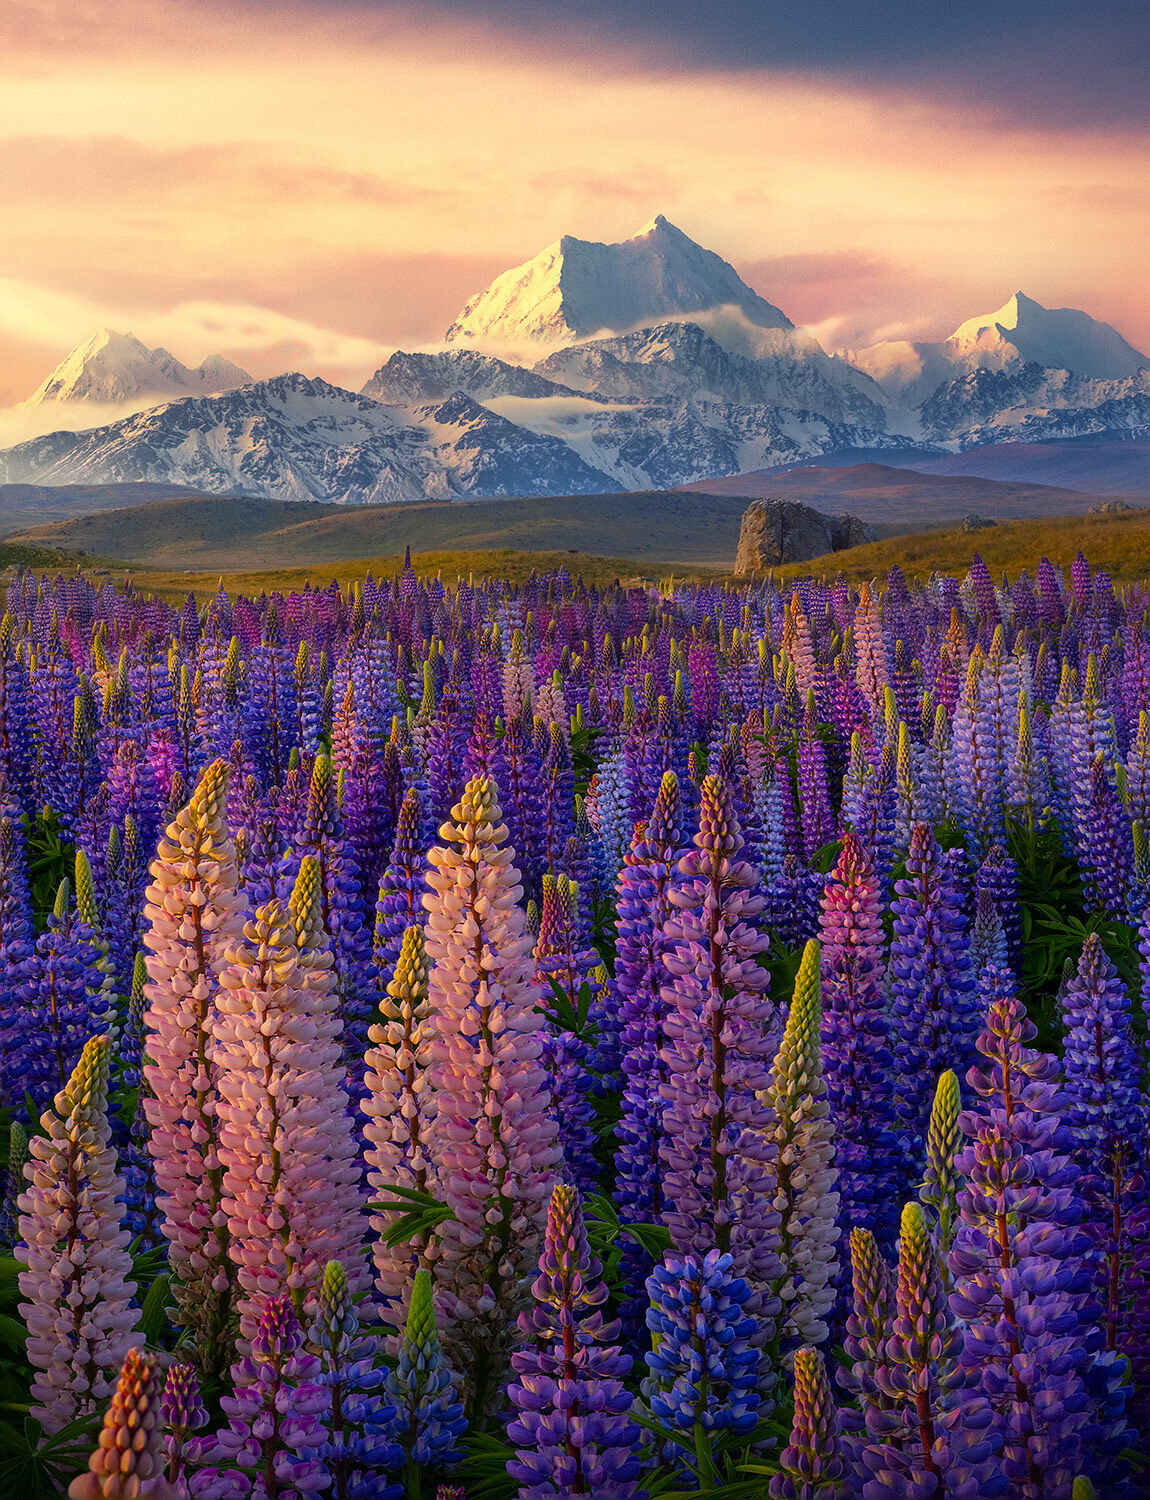 These were the most spectacular flowers I ever photographed in decades of travel.  Say what you will about the Lupin, New Zealand...